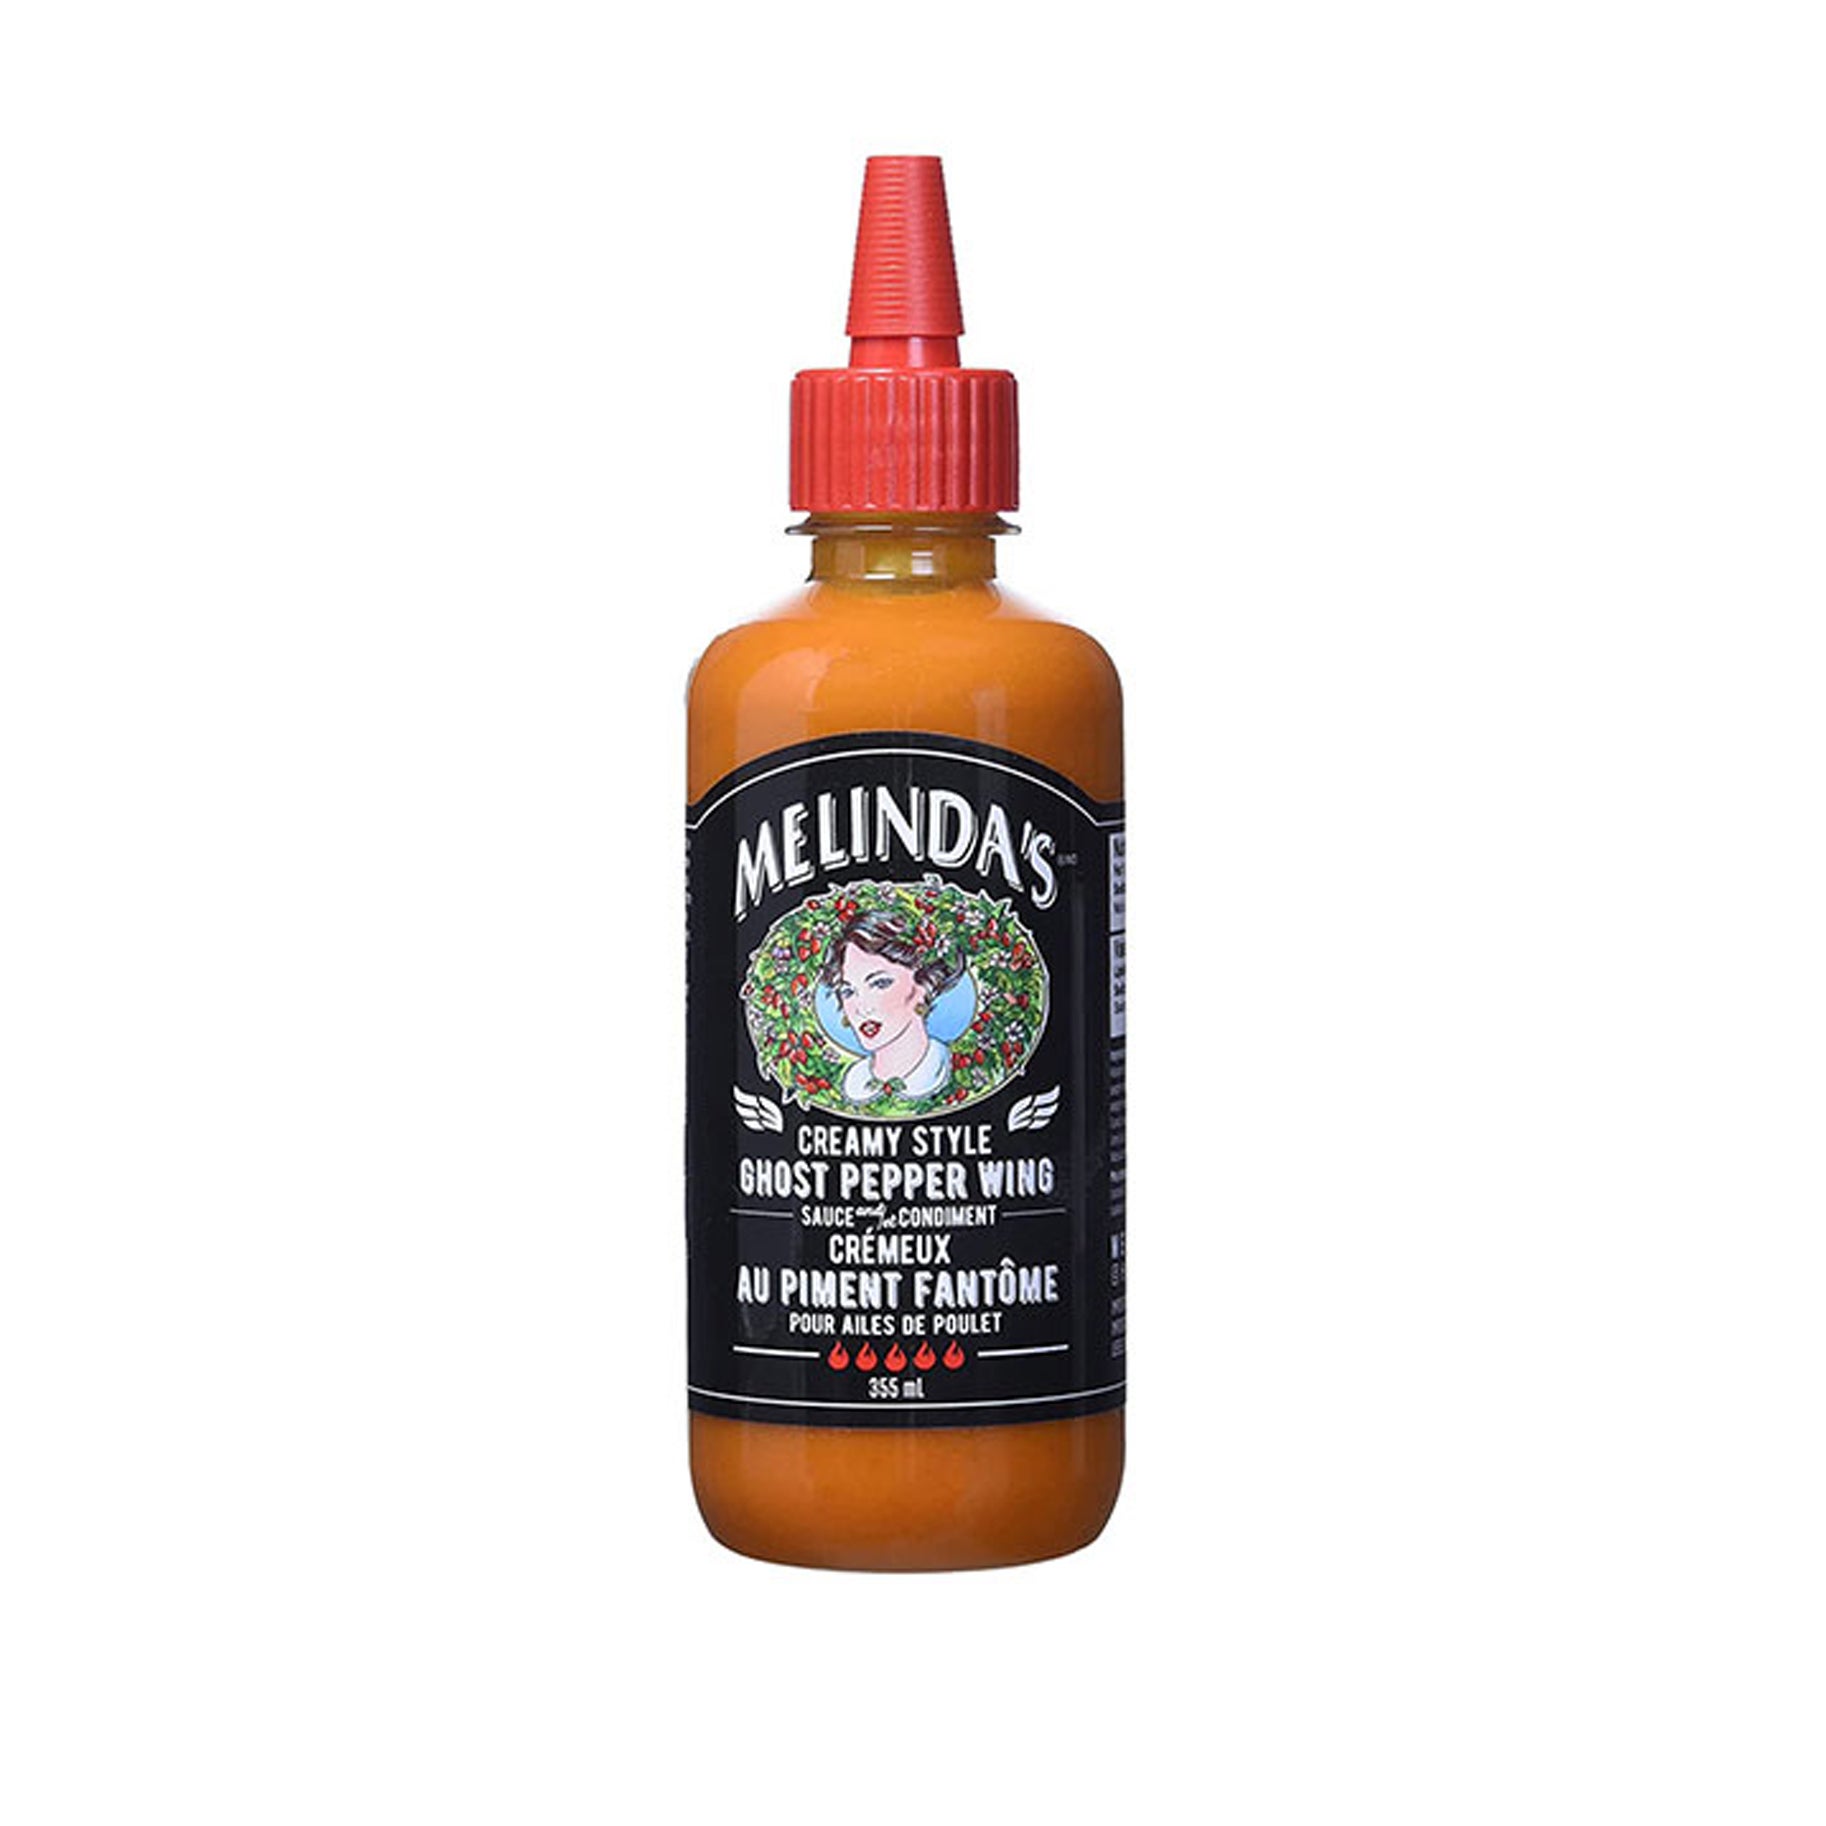 The Best Hot Sauces Option: Melinda’s Ghost Pepper Wing Sauce